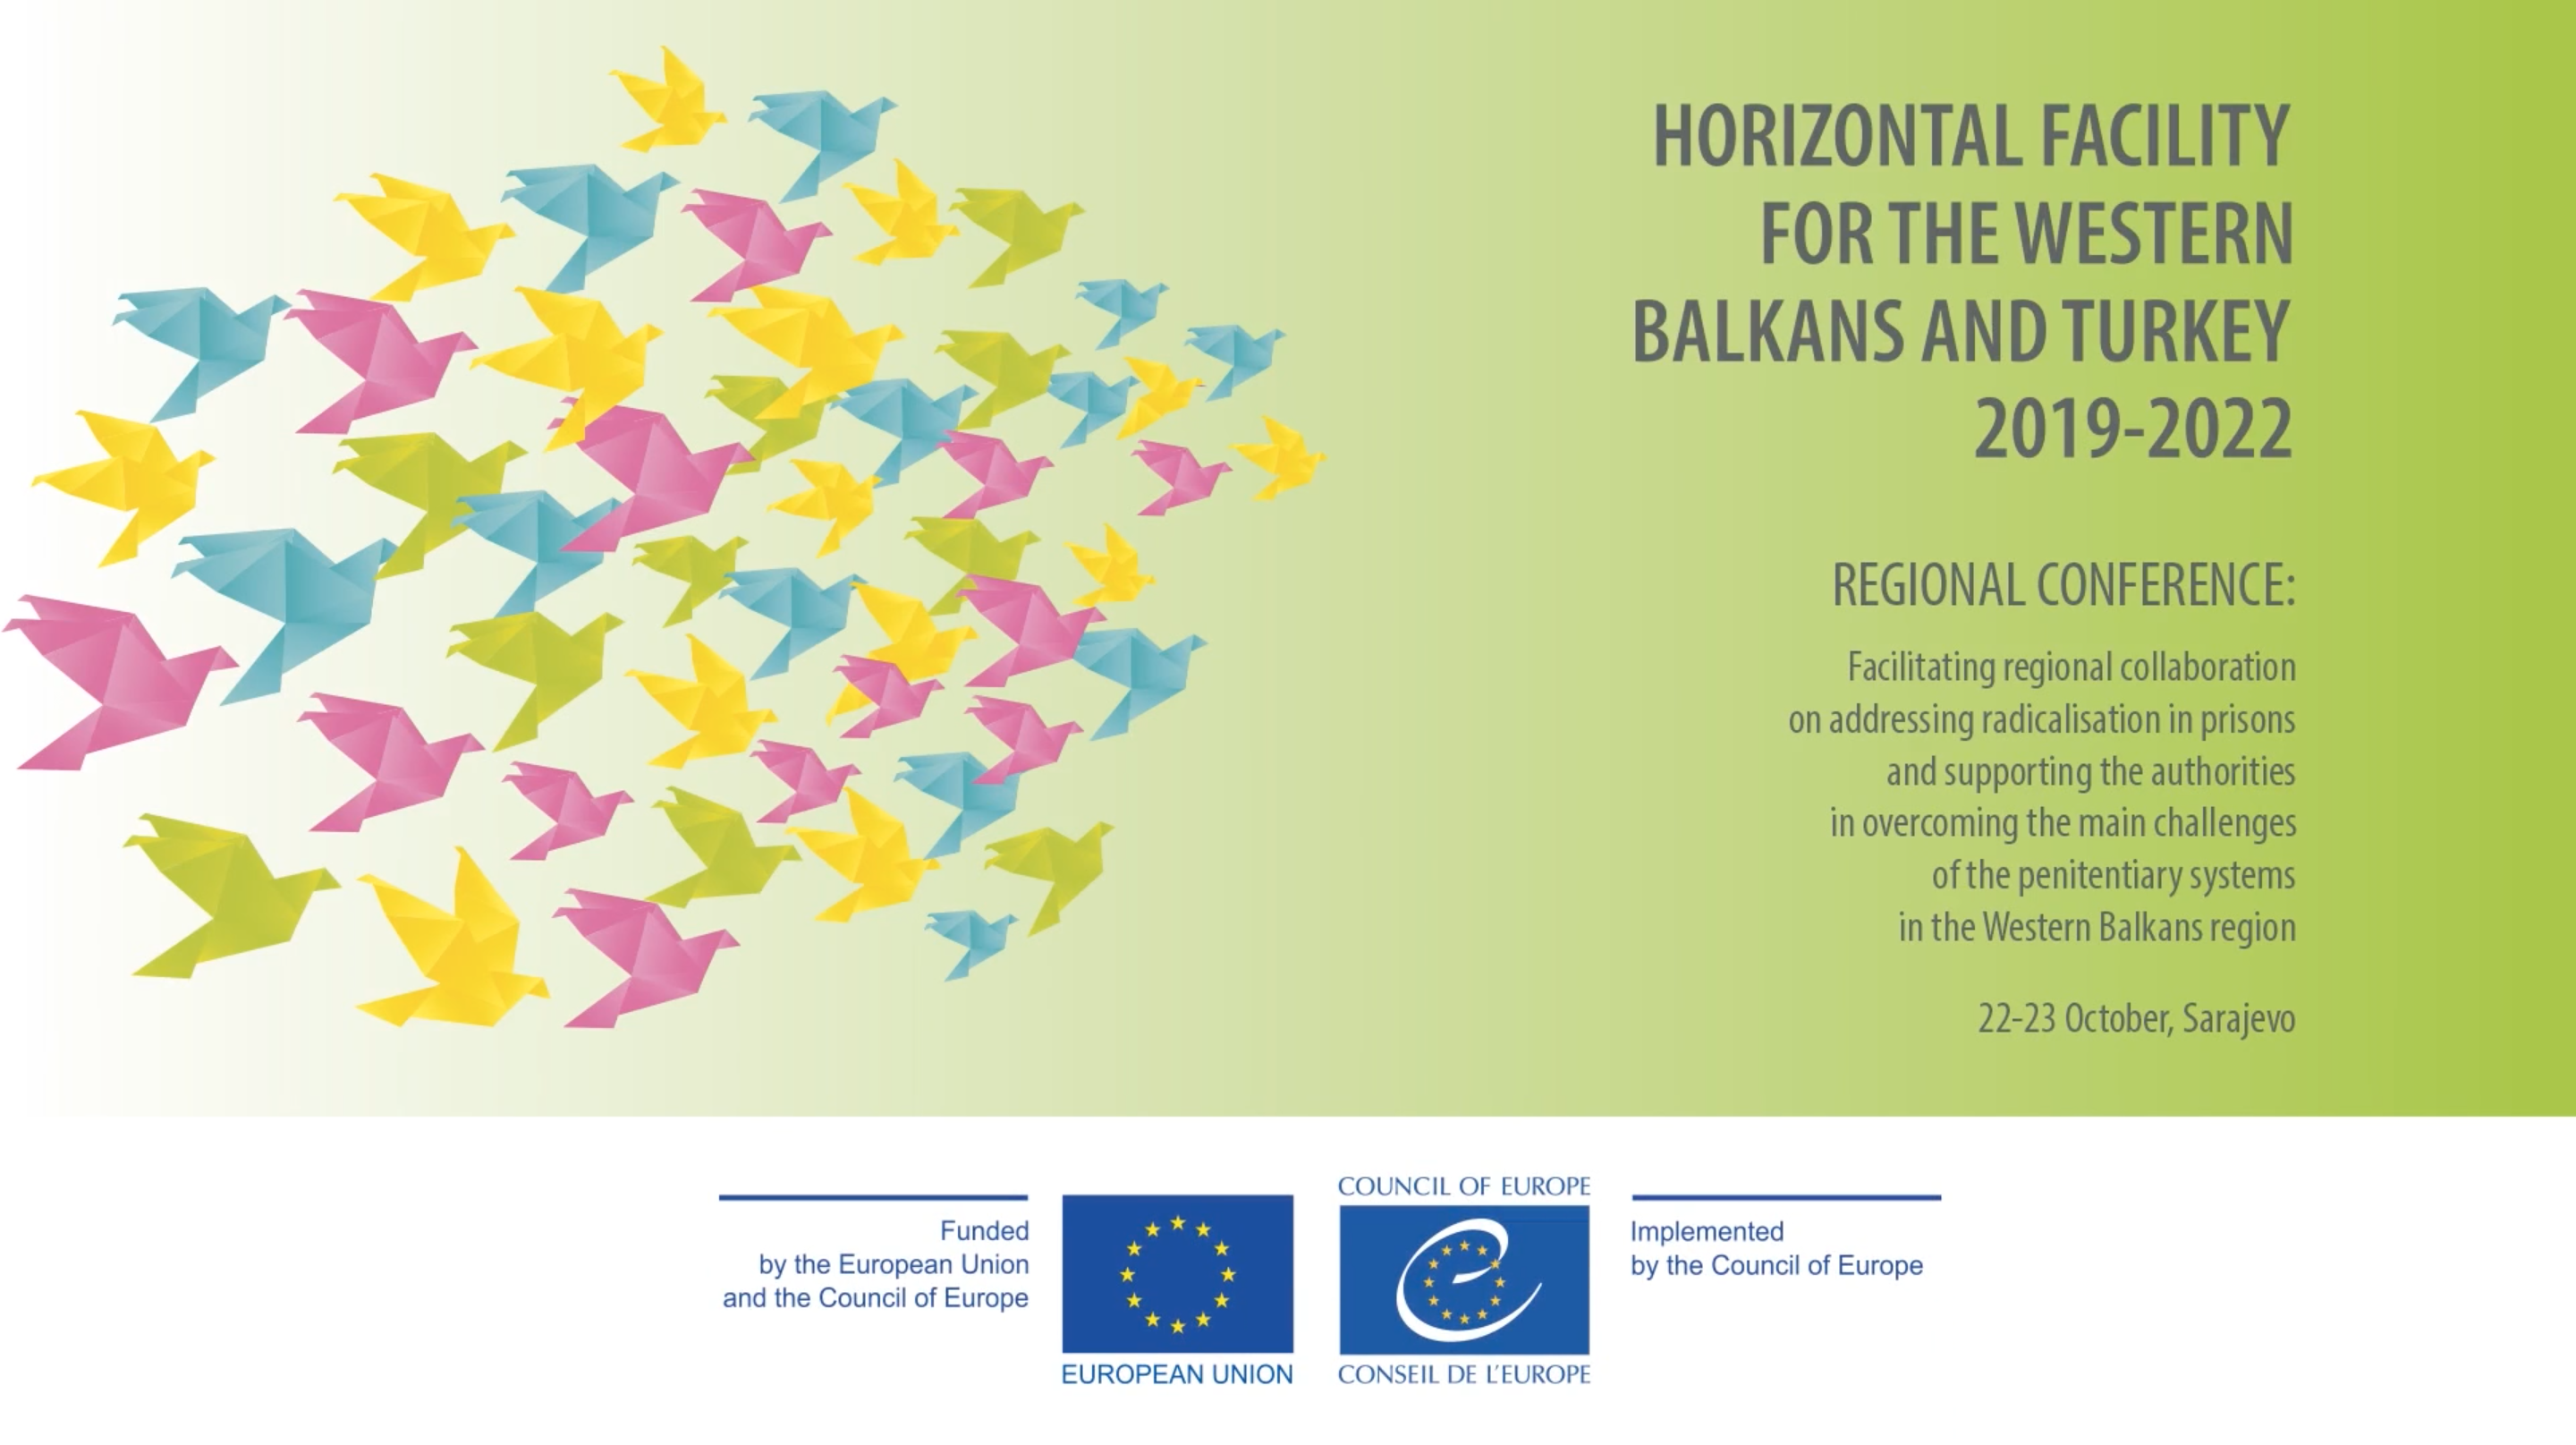 Regional conference on addressing radicalisation in prisons in the Western Balkans